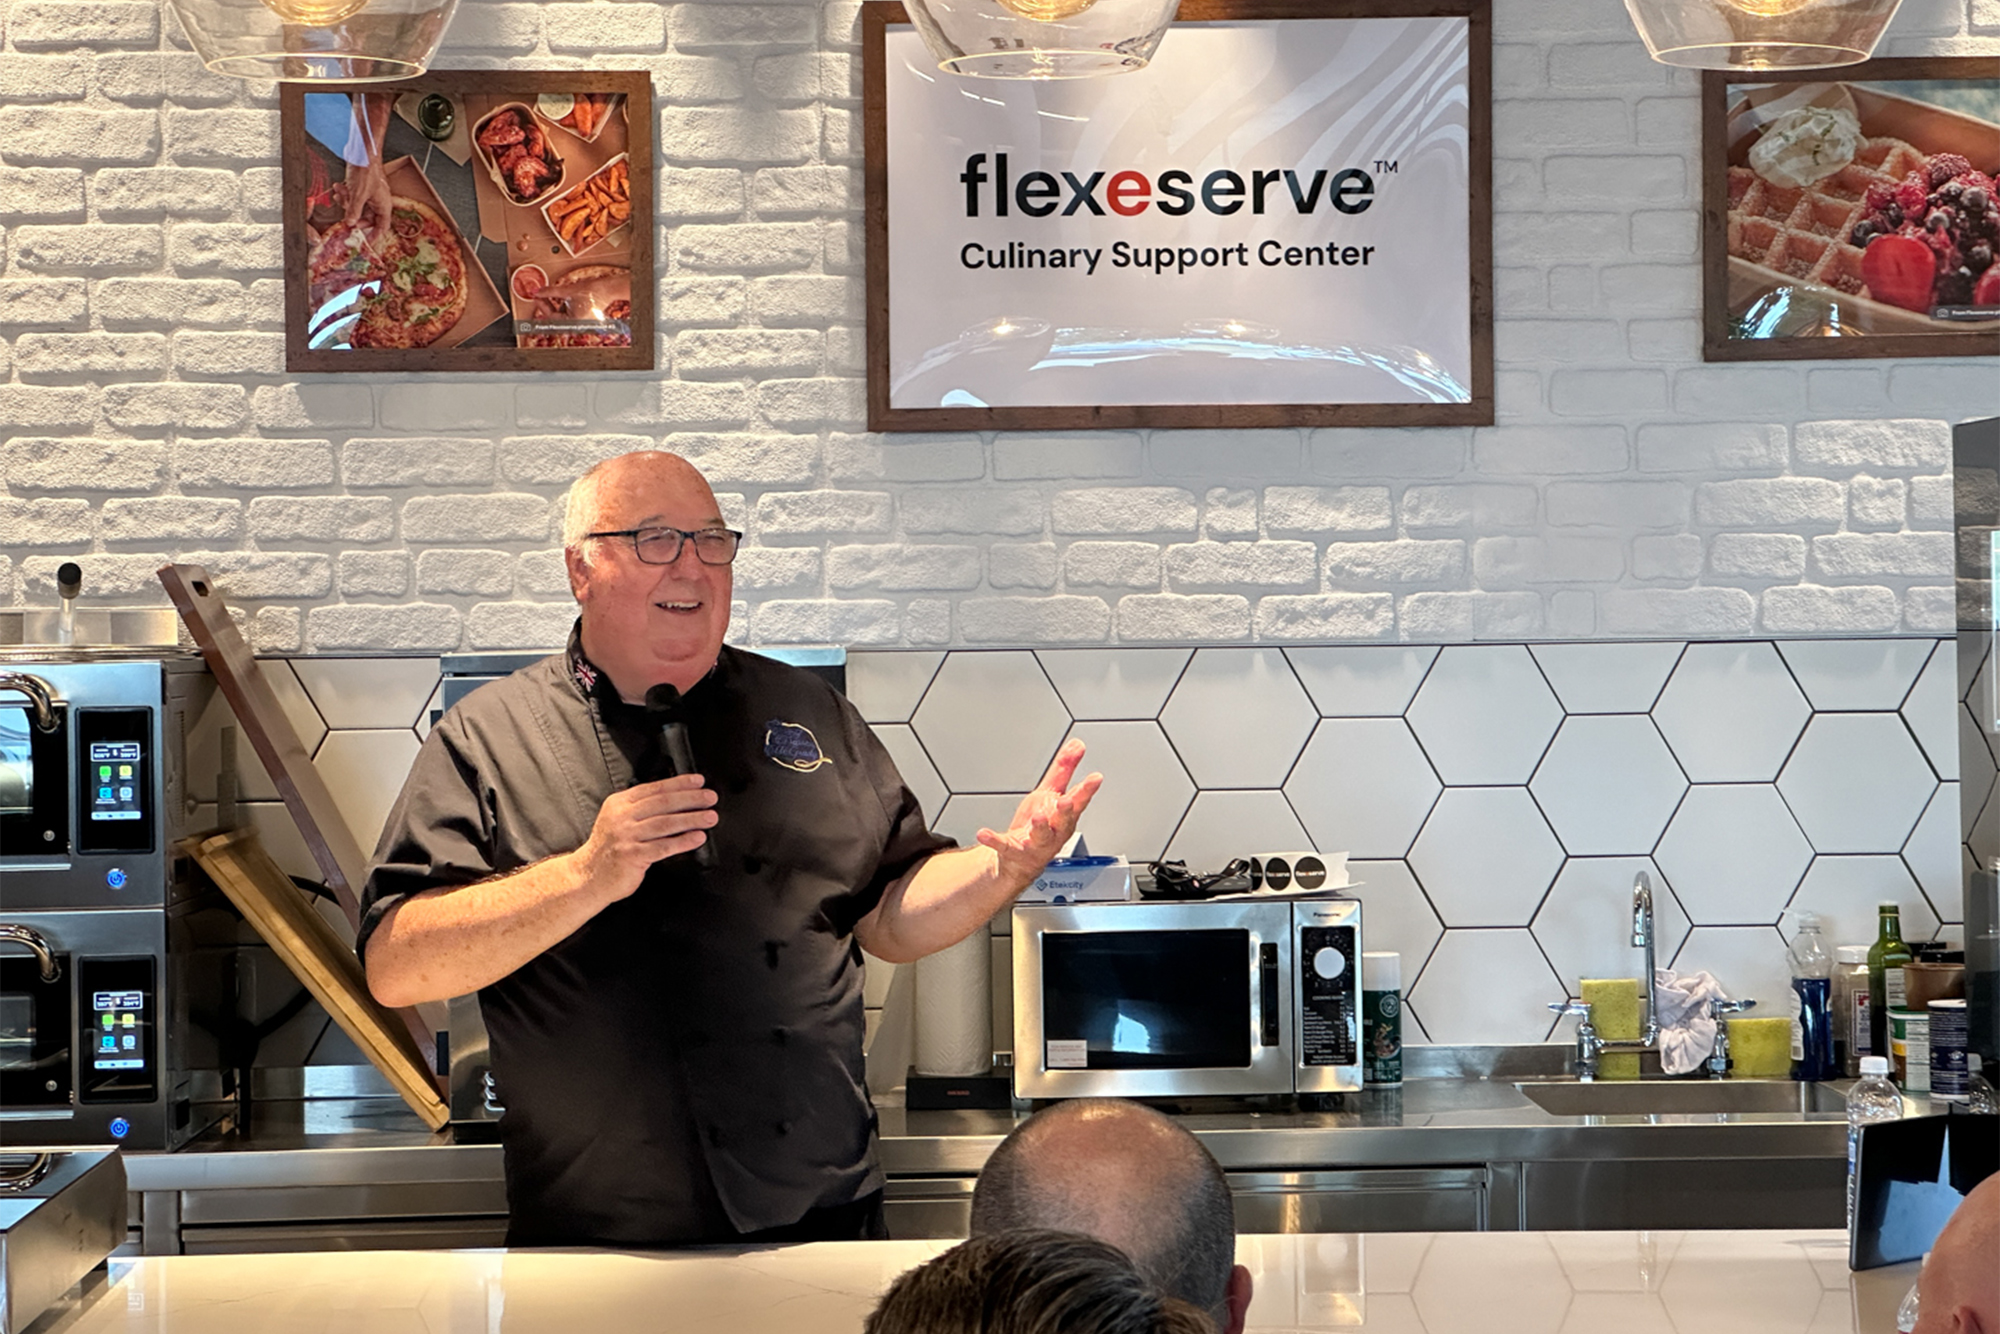 Guest speaker, The Royal Chef, Darren McGrady was a highlight of the day at the Flexeserve Inc. Grand Opening